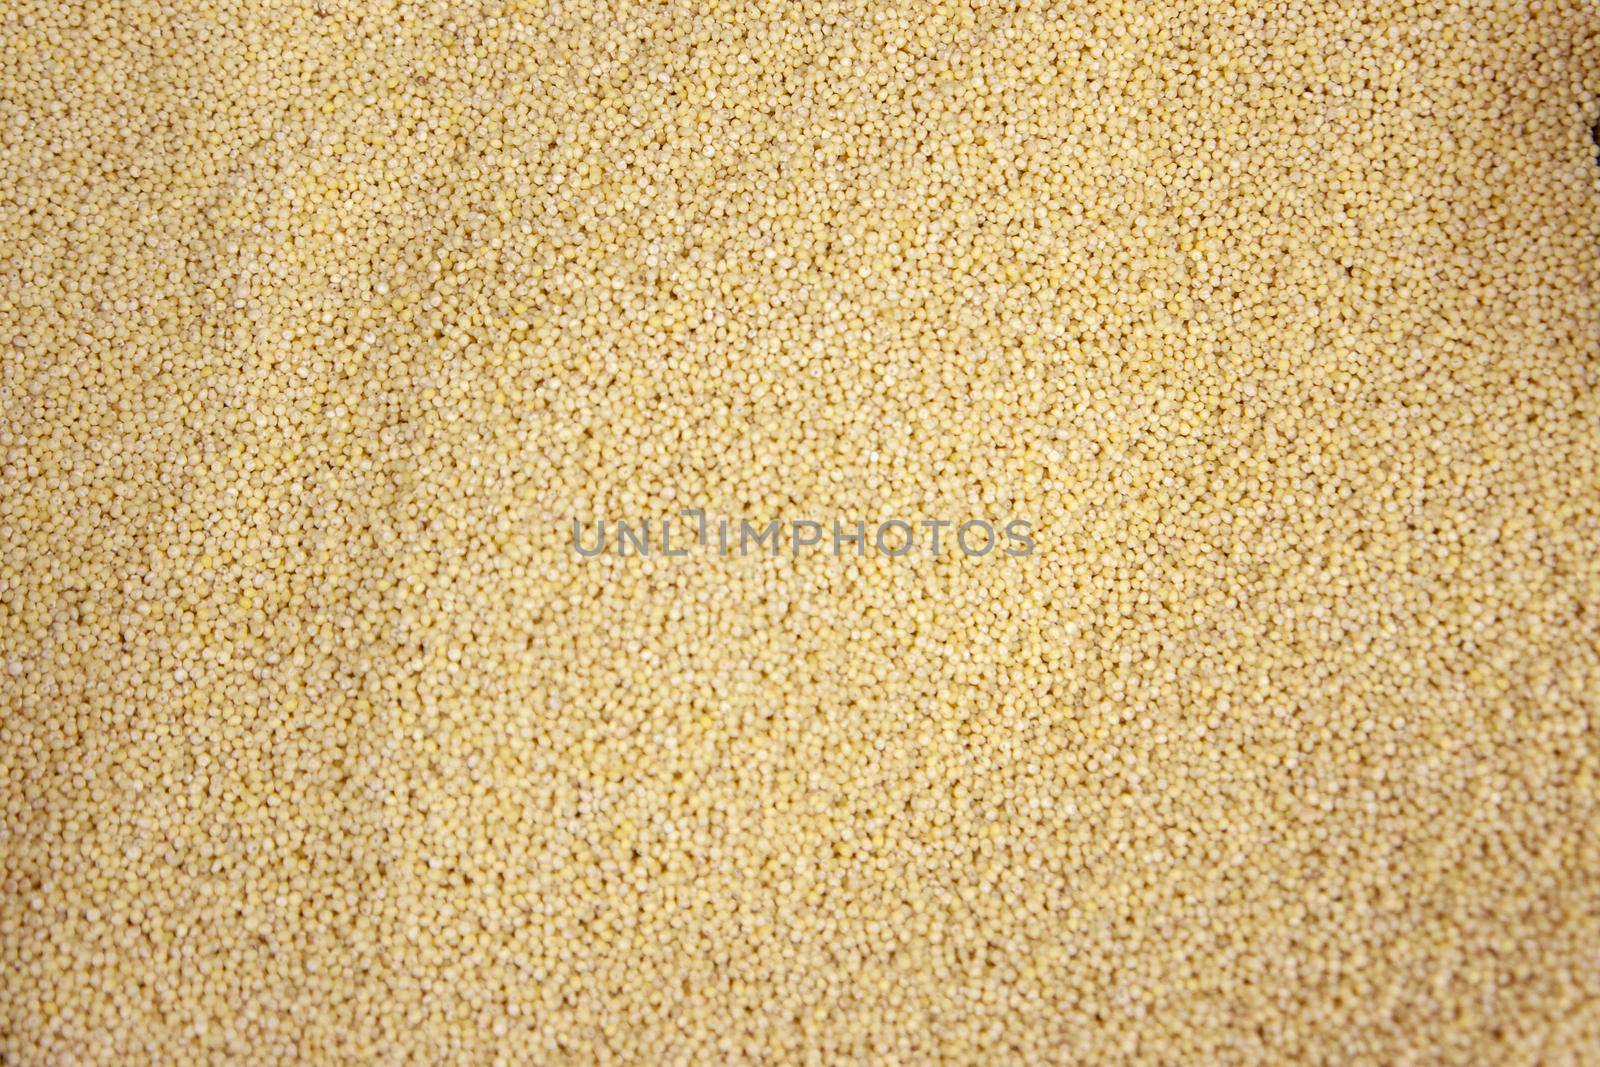 small yellow colored pearls of millet in a bin 